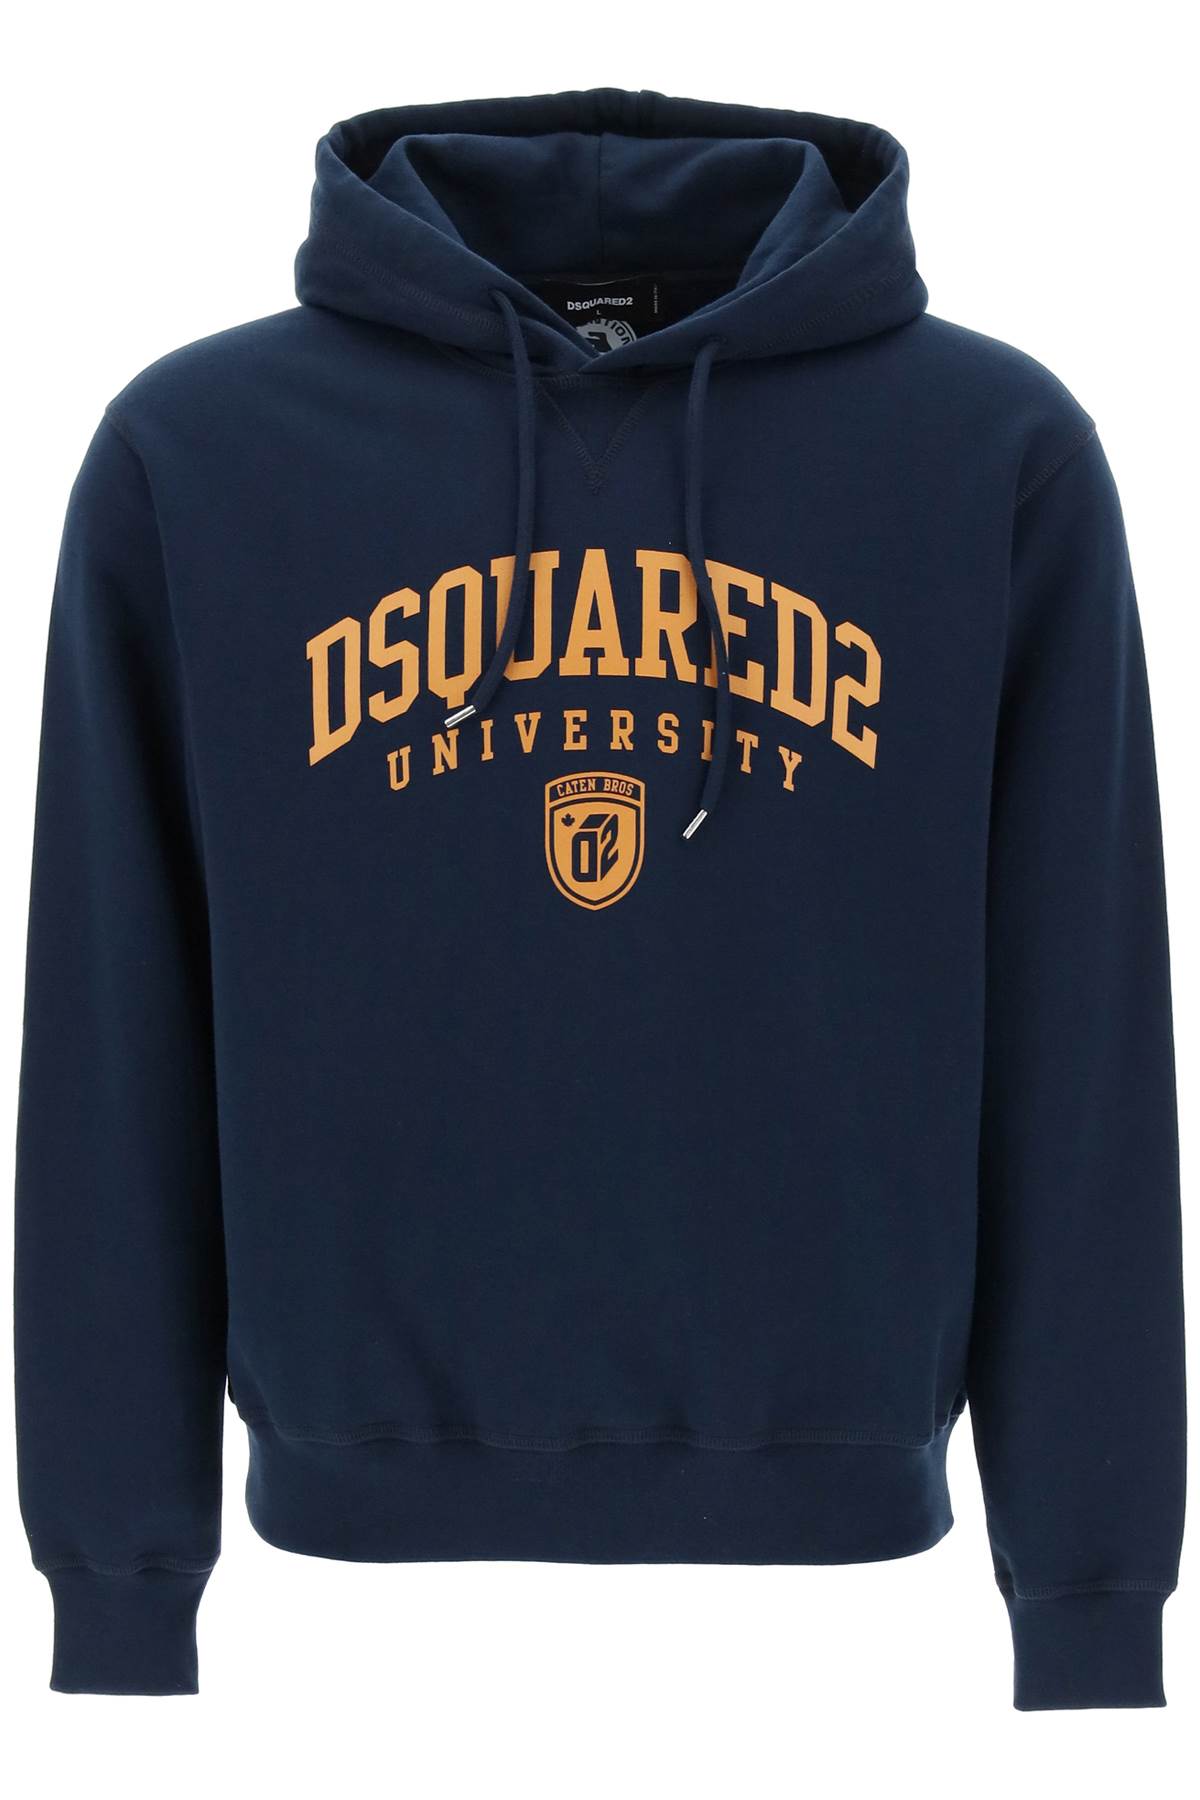 Dsquared2 'university' cool fit hoodie-0